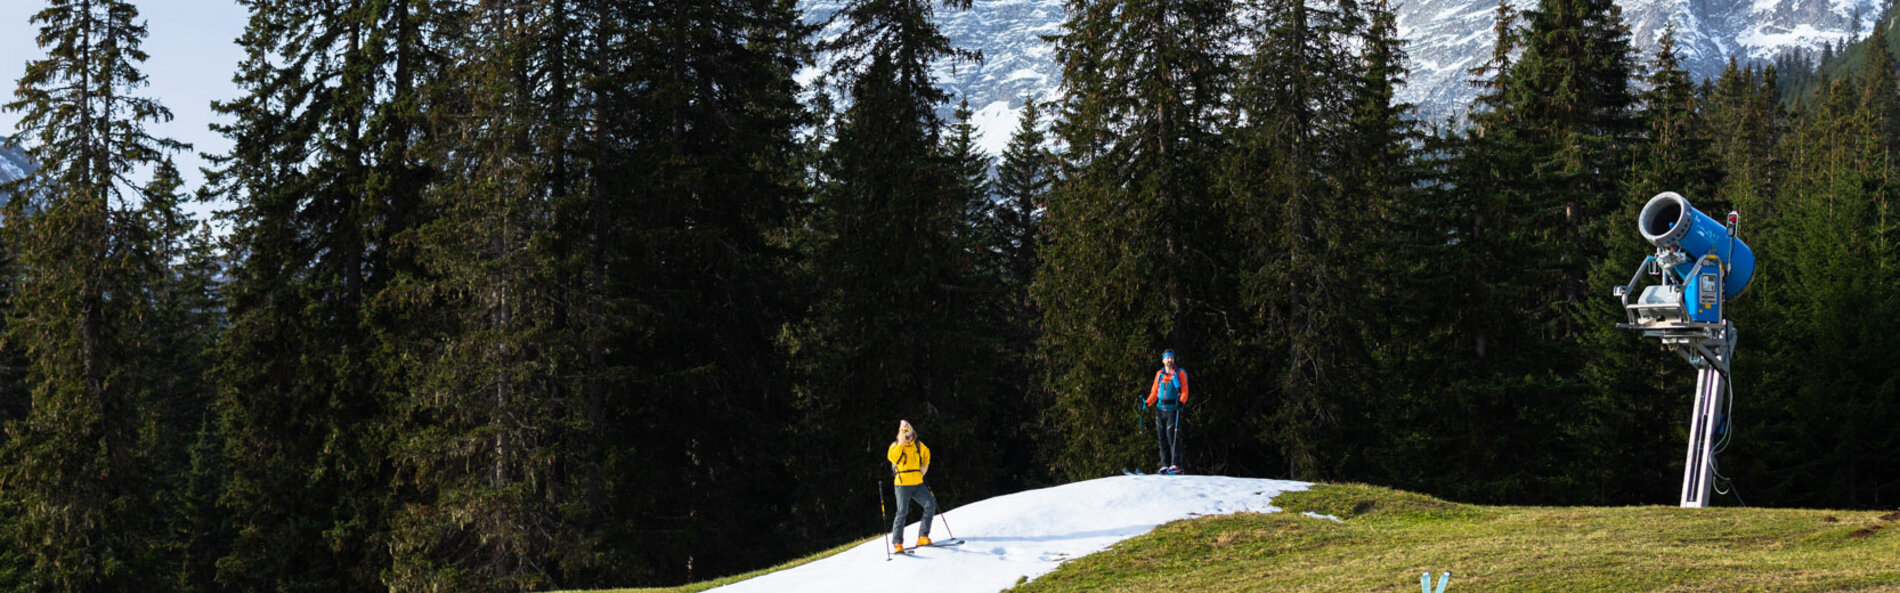 Two ski tourers on a pile of artificial snow.